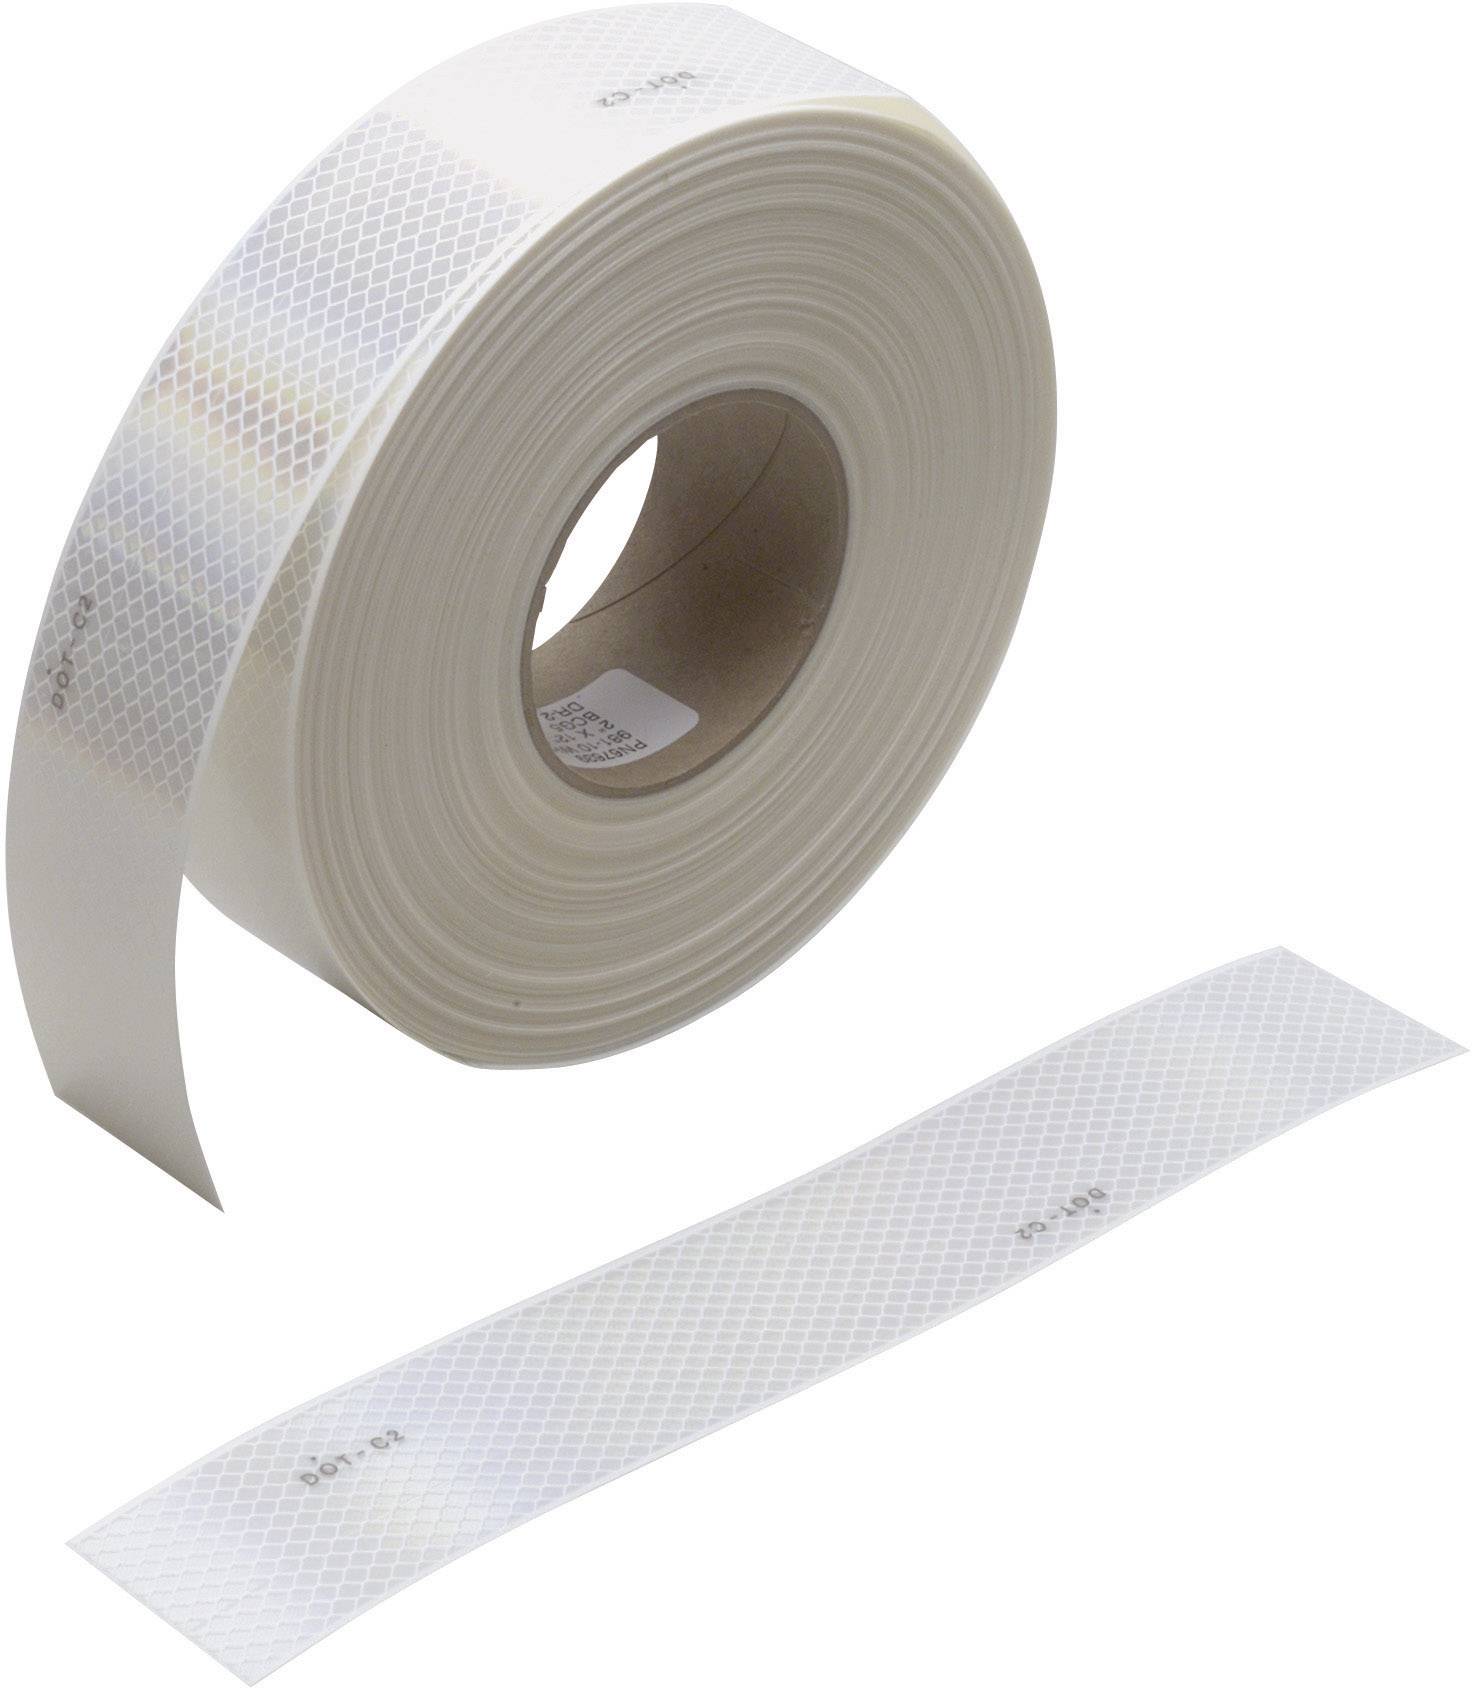 3M 3430 Engineer Grade Prismatic Reflective WHITE CONSPICUITY TAPE 3/8" x 5yd 